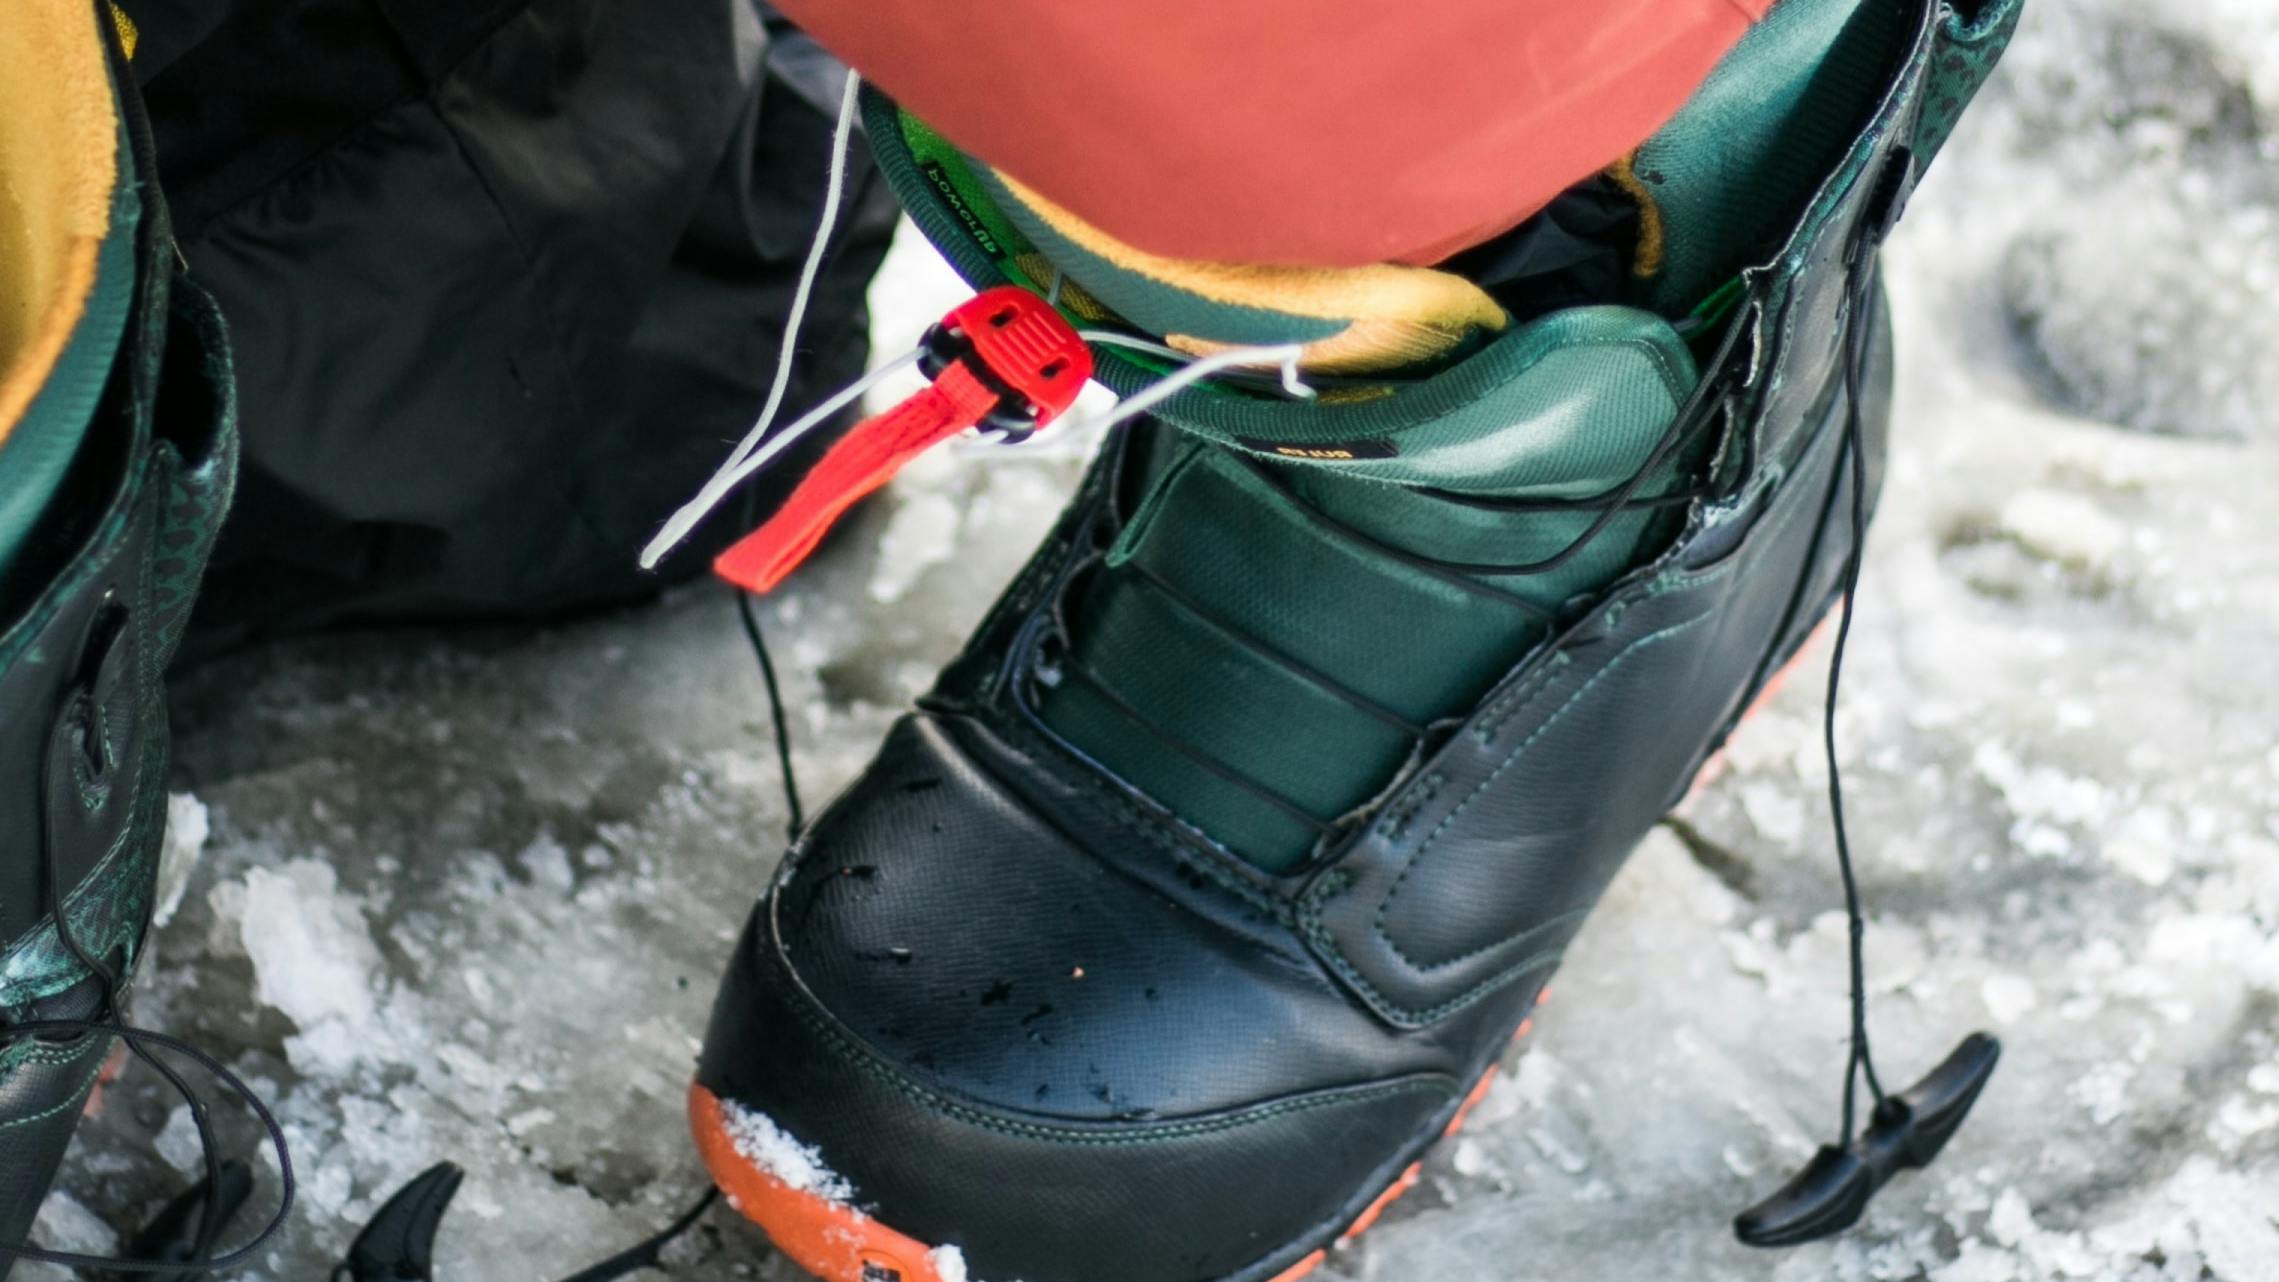 A woman puts her foot in a snowboard boot.